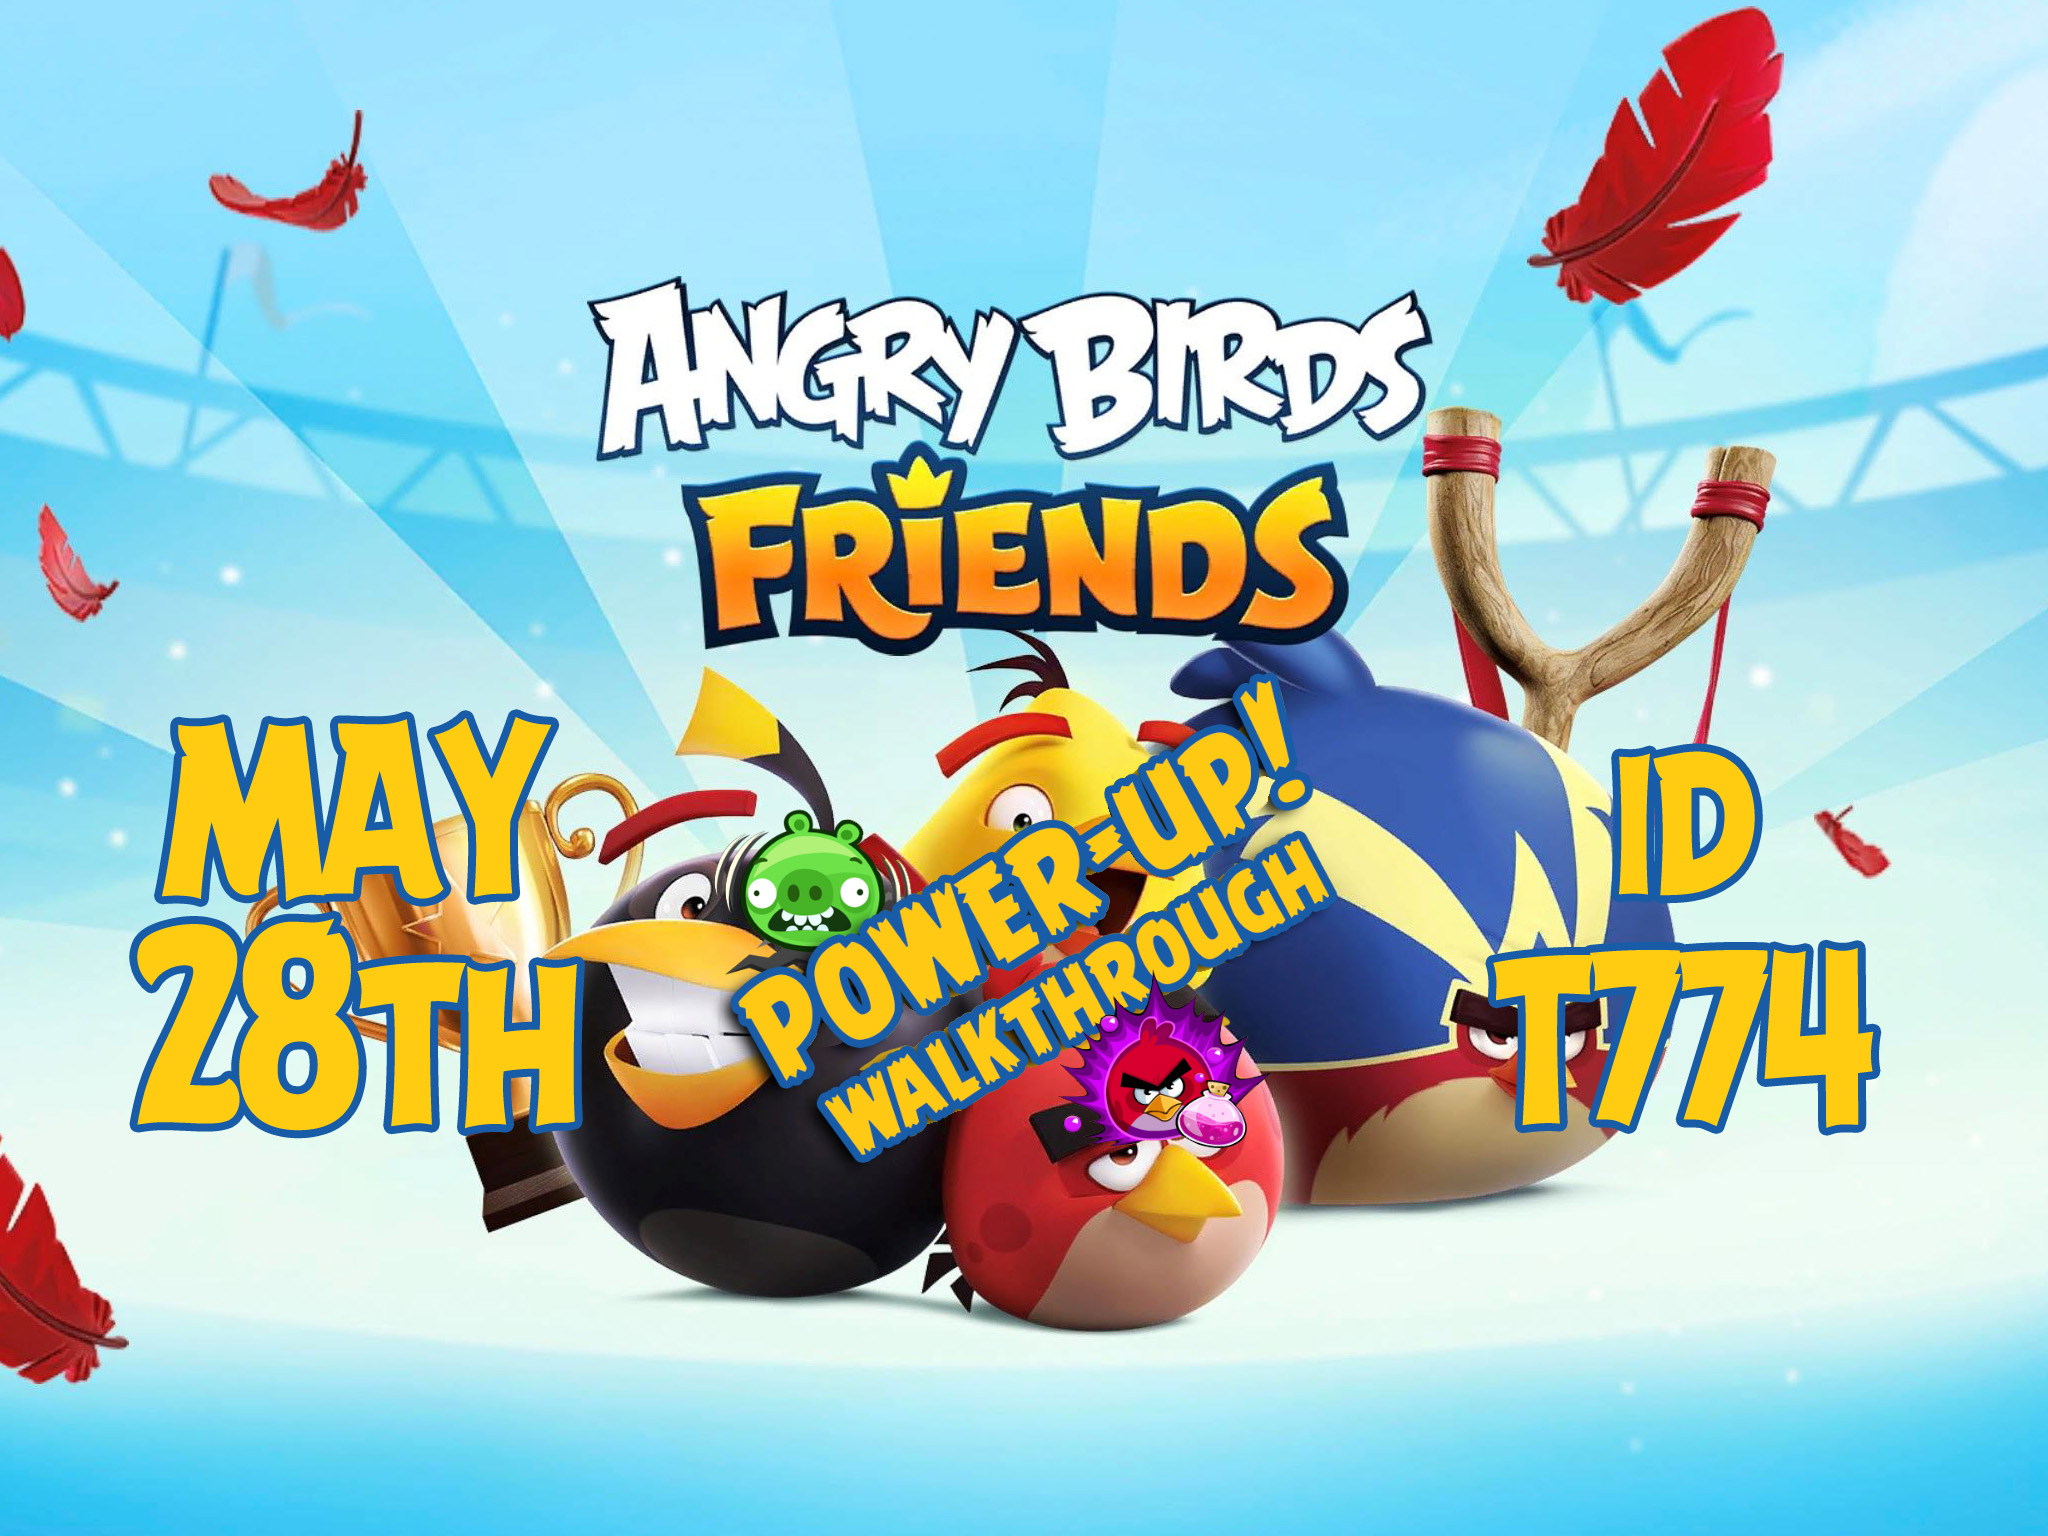 Angry-Birds-Friends-Tournament-T774-Feature-Image-PU